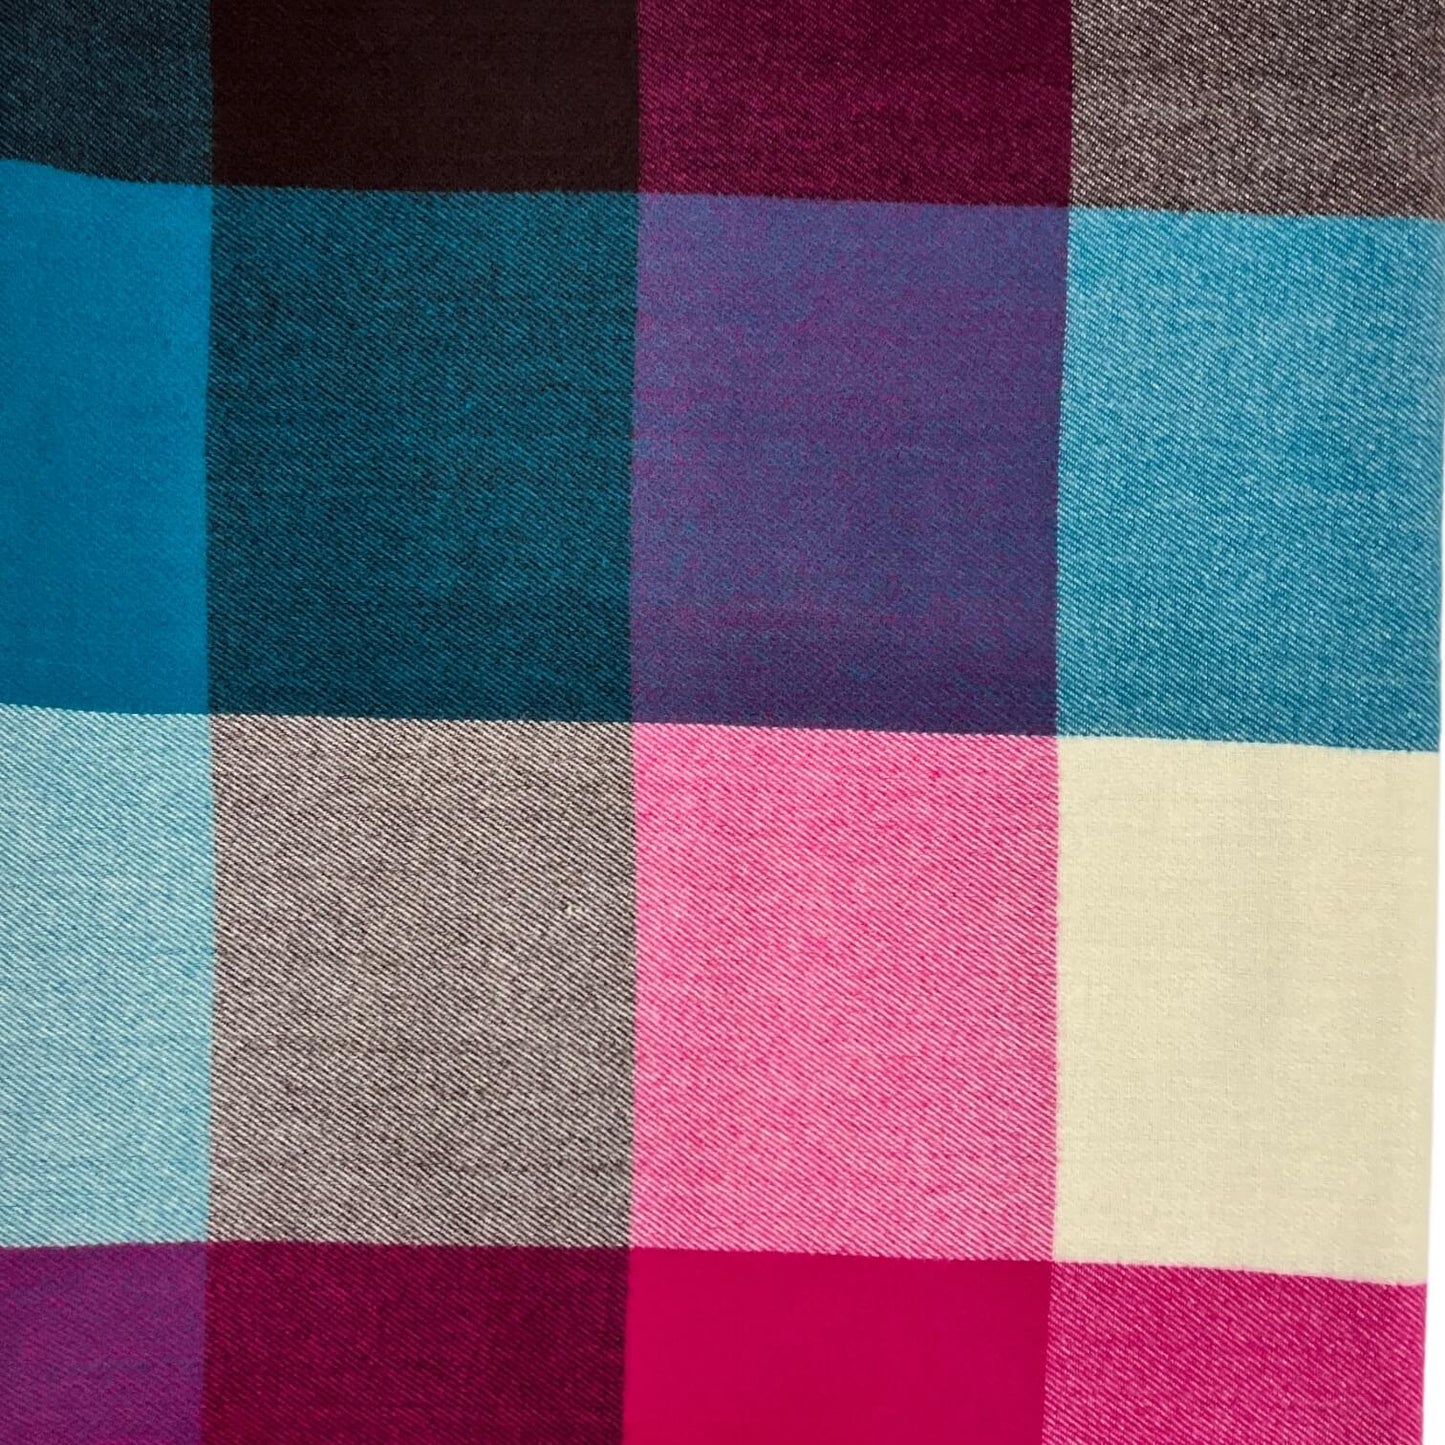 Teal and Pink Wool Mix Classic Check Scarf